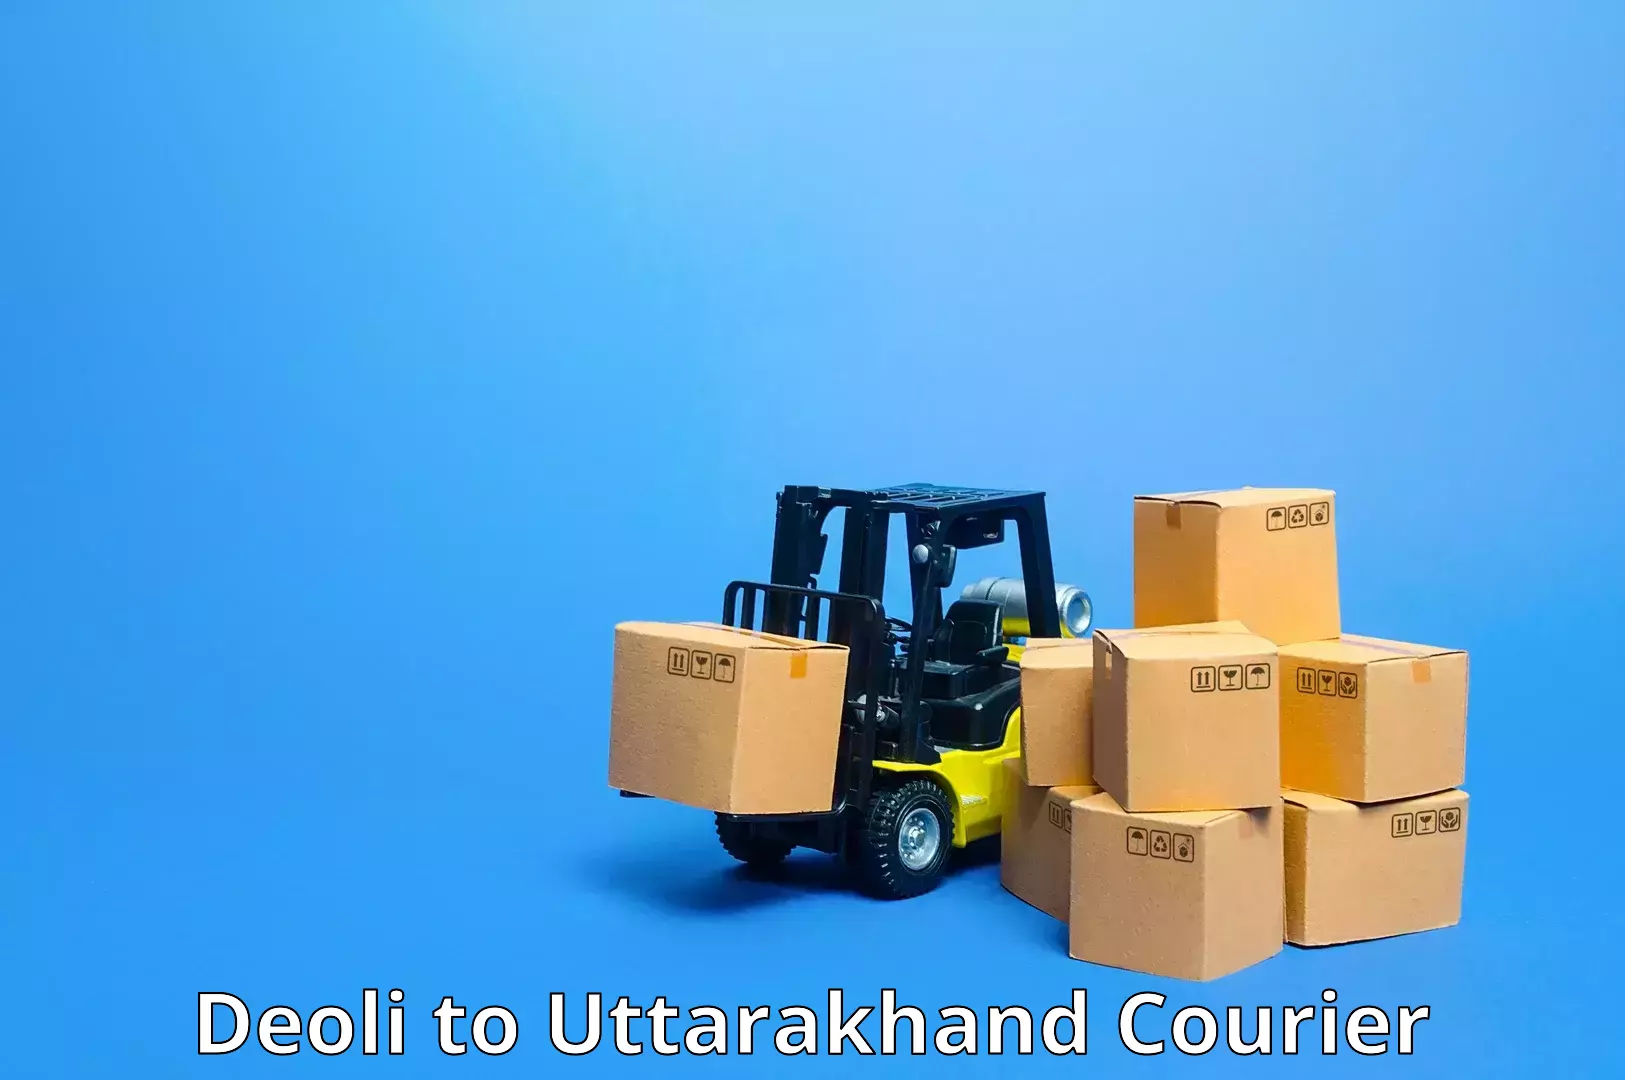 High-capacity parcel service Deoli to Rudrapur